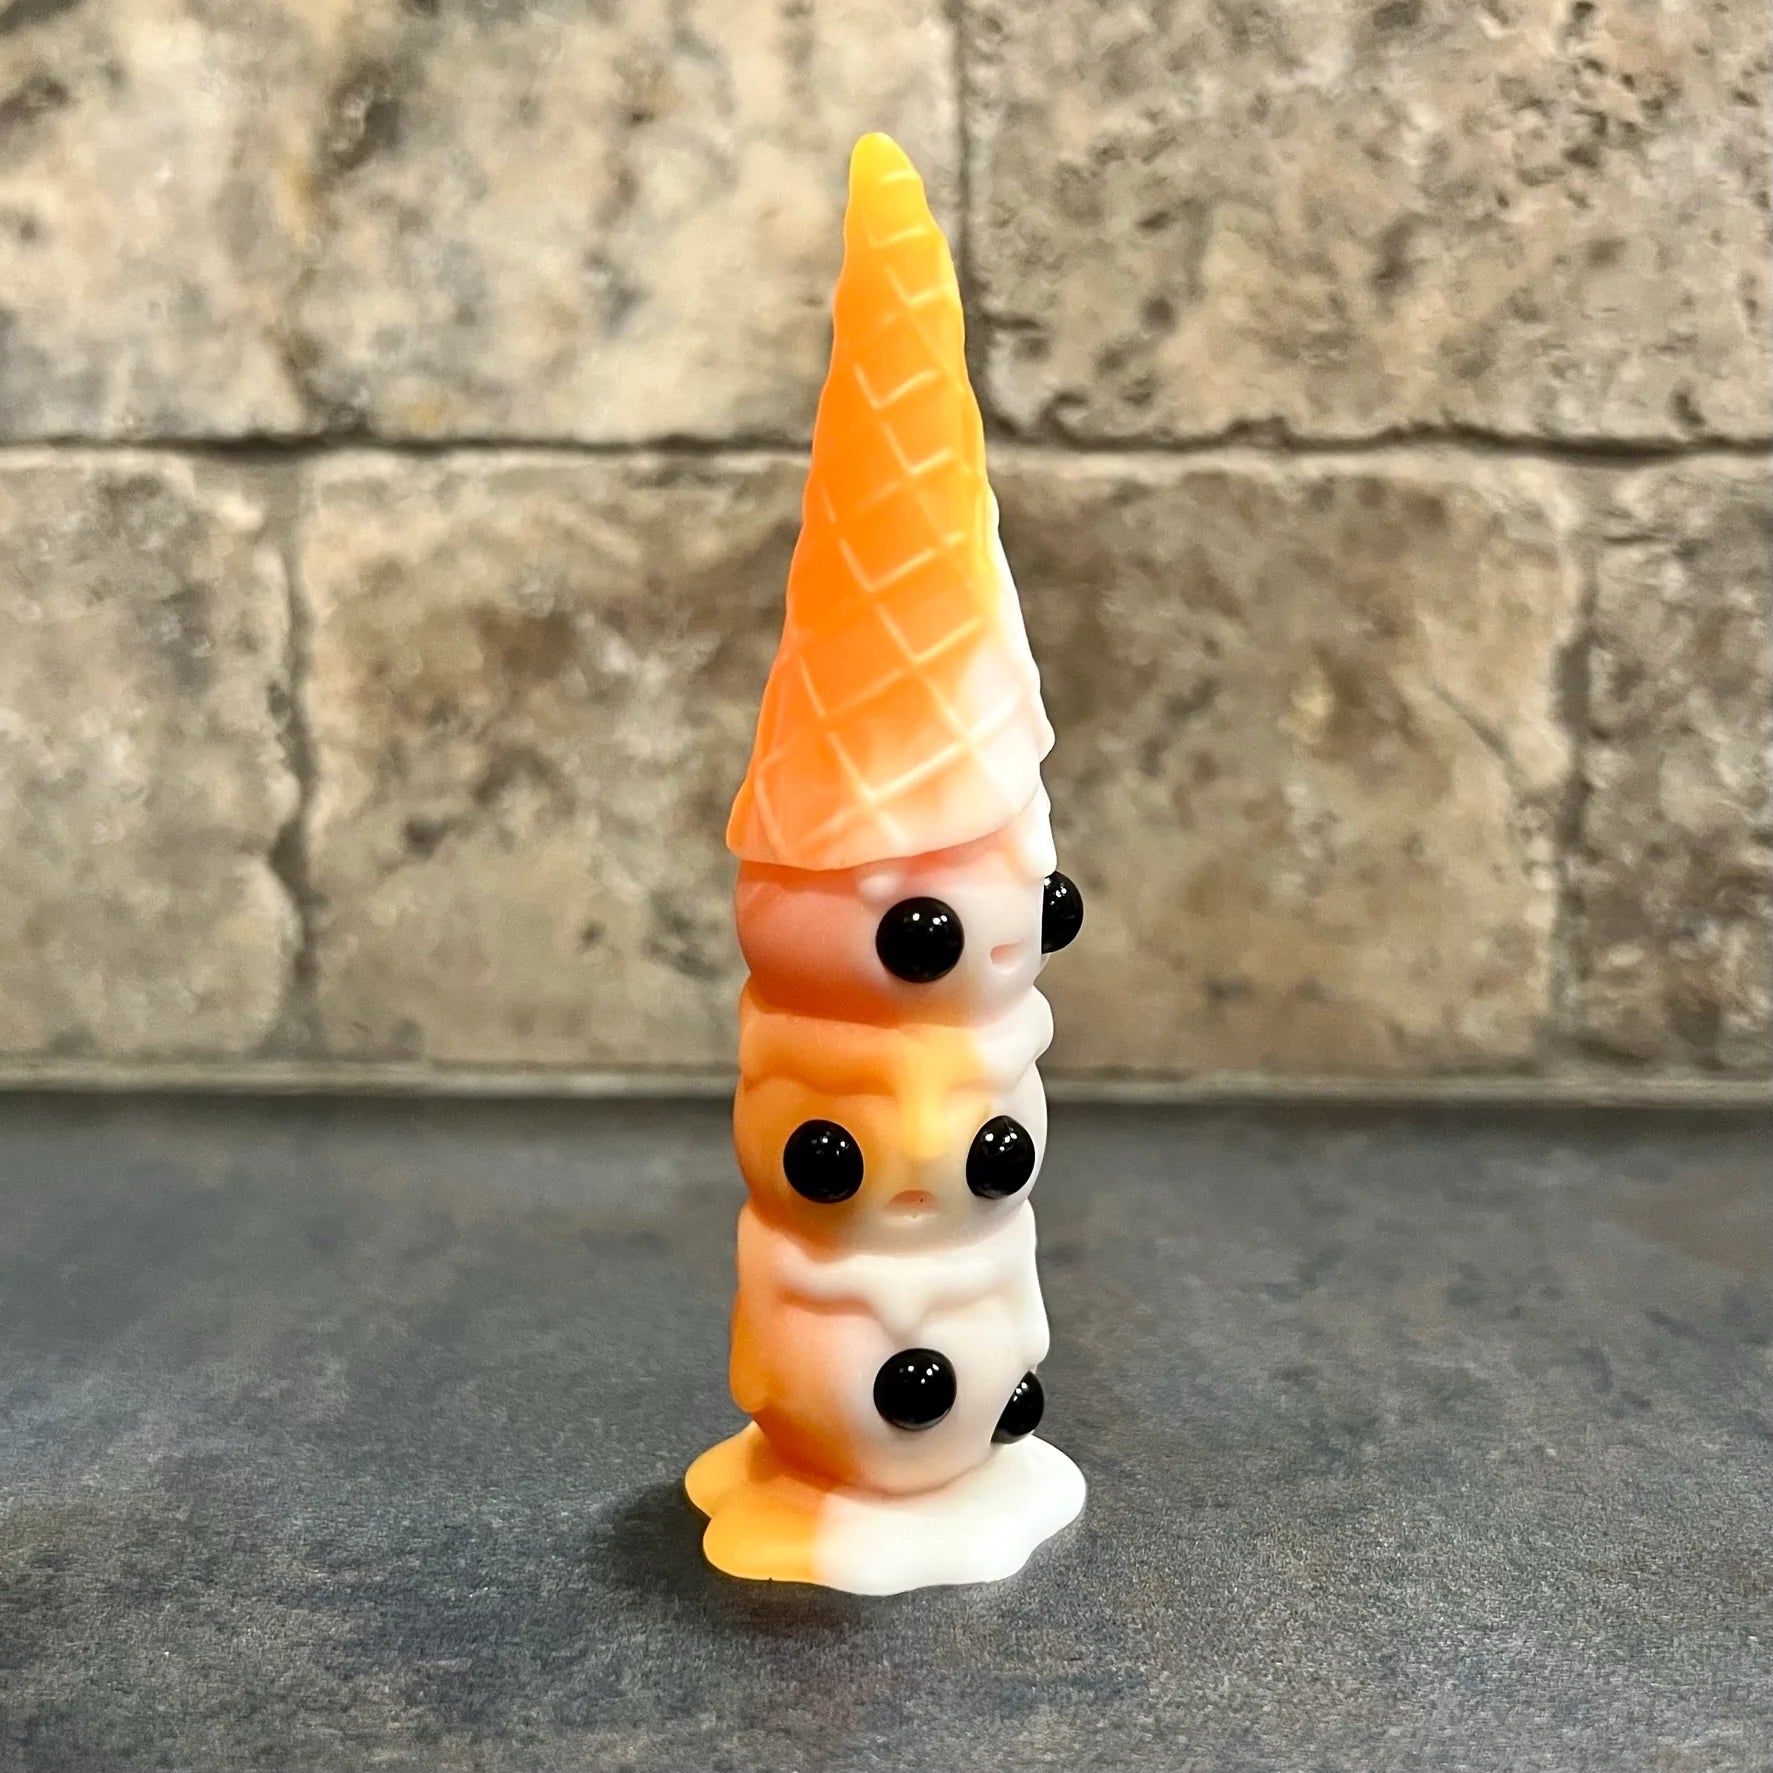 This is Wafull Creamsicle by Leftover Toys